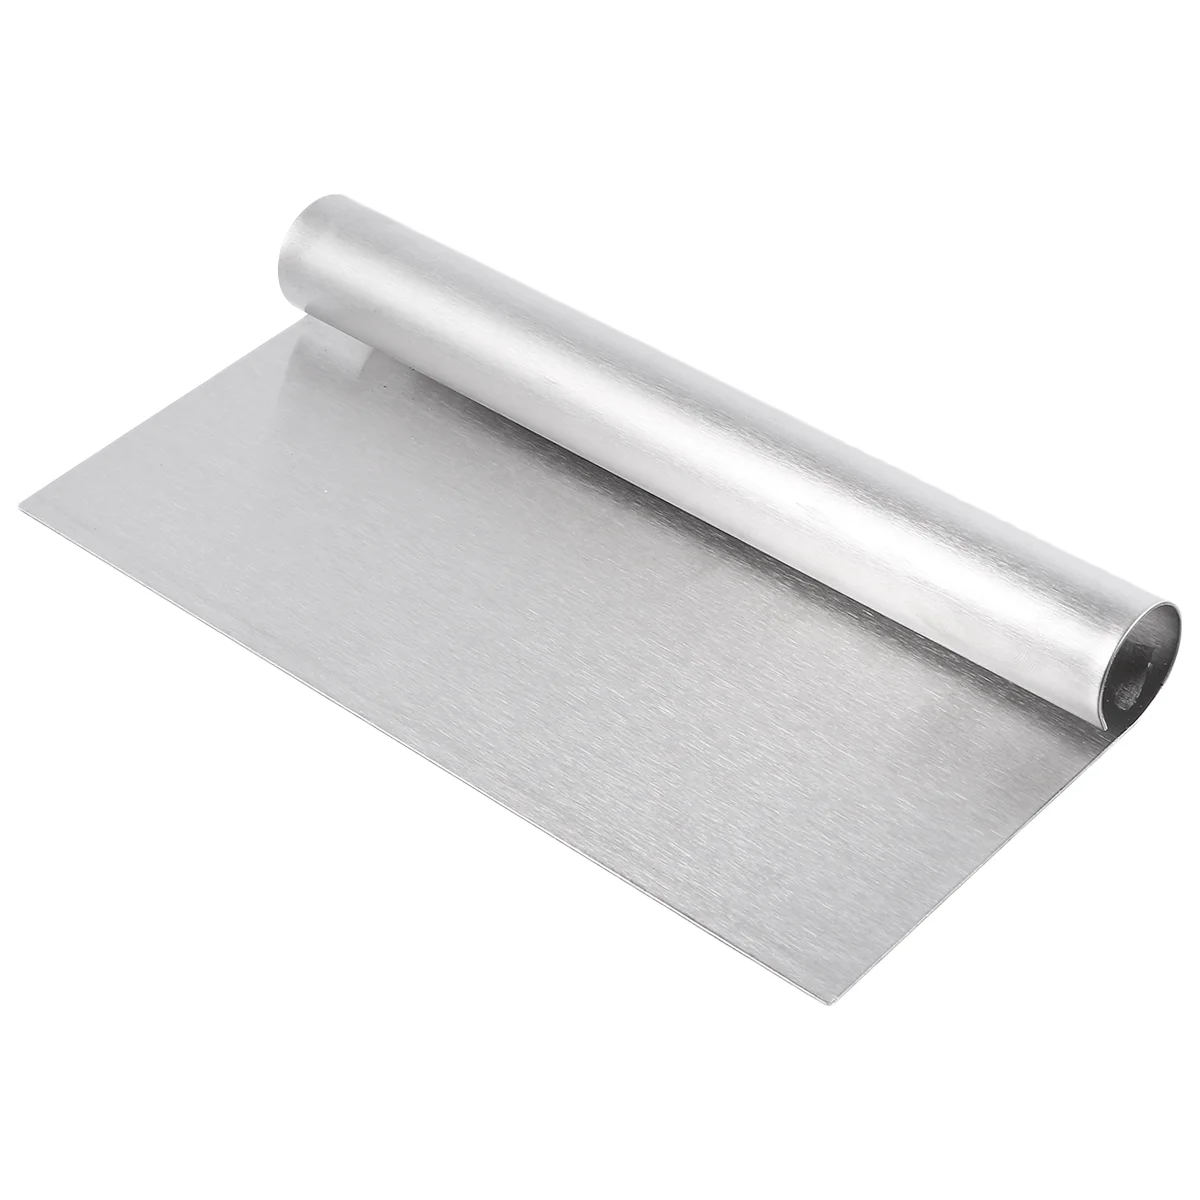 

Scraper Dough Cake Bench Metal Baking Pastry Steel Stainless Bread Scrapers Kitchen Smoother Fondant Pizza Griddle Smoothing